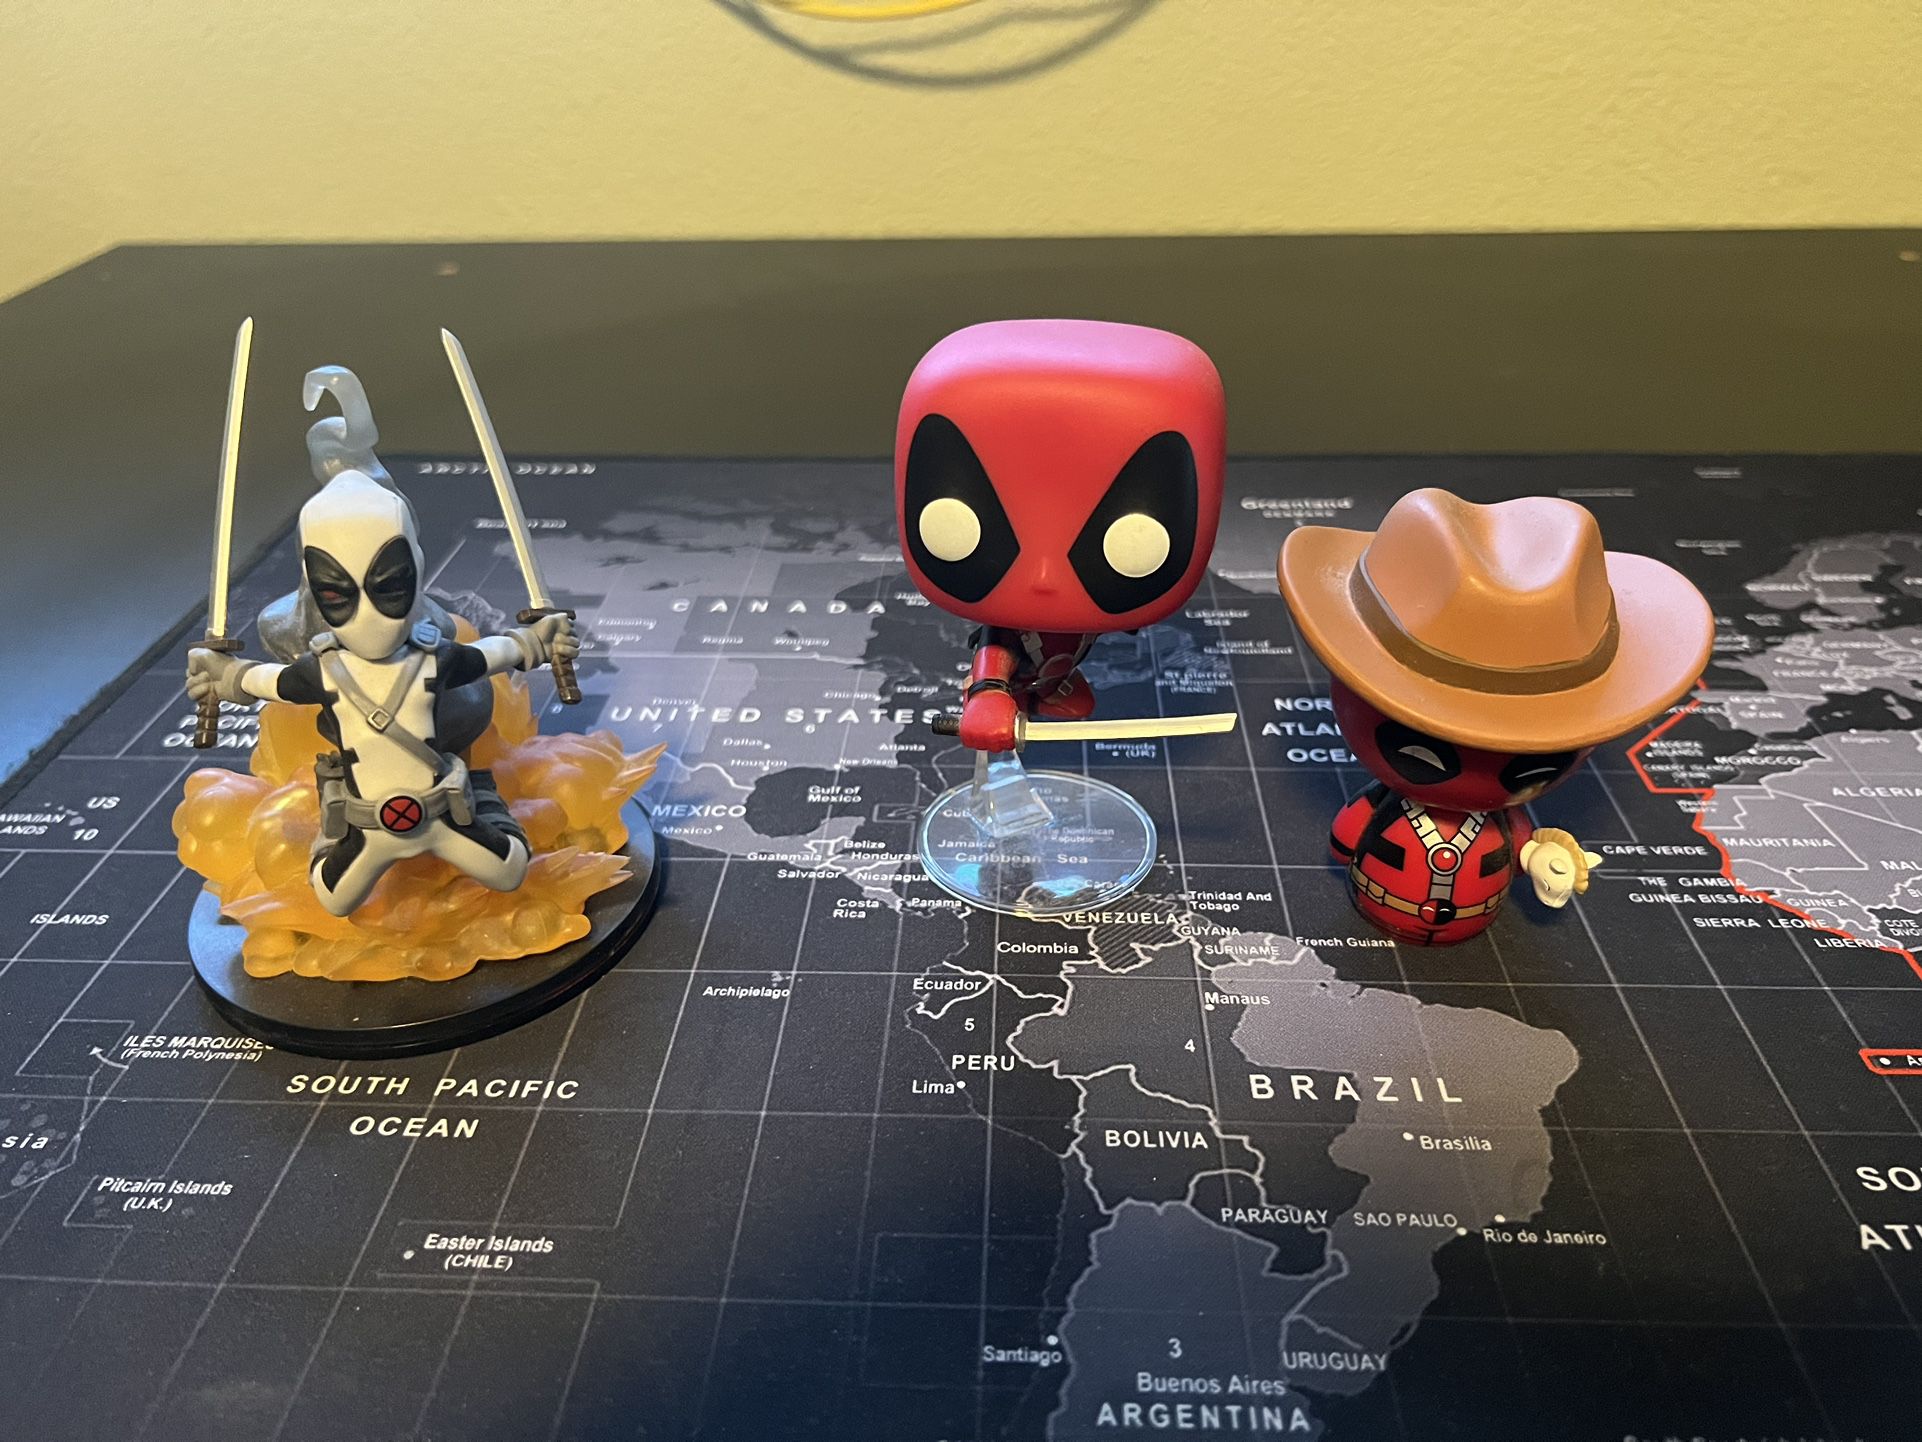 Deadpool Funko Pops And Toy / Decor